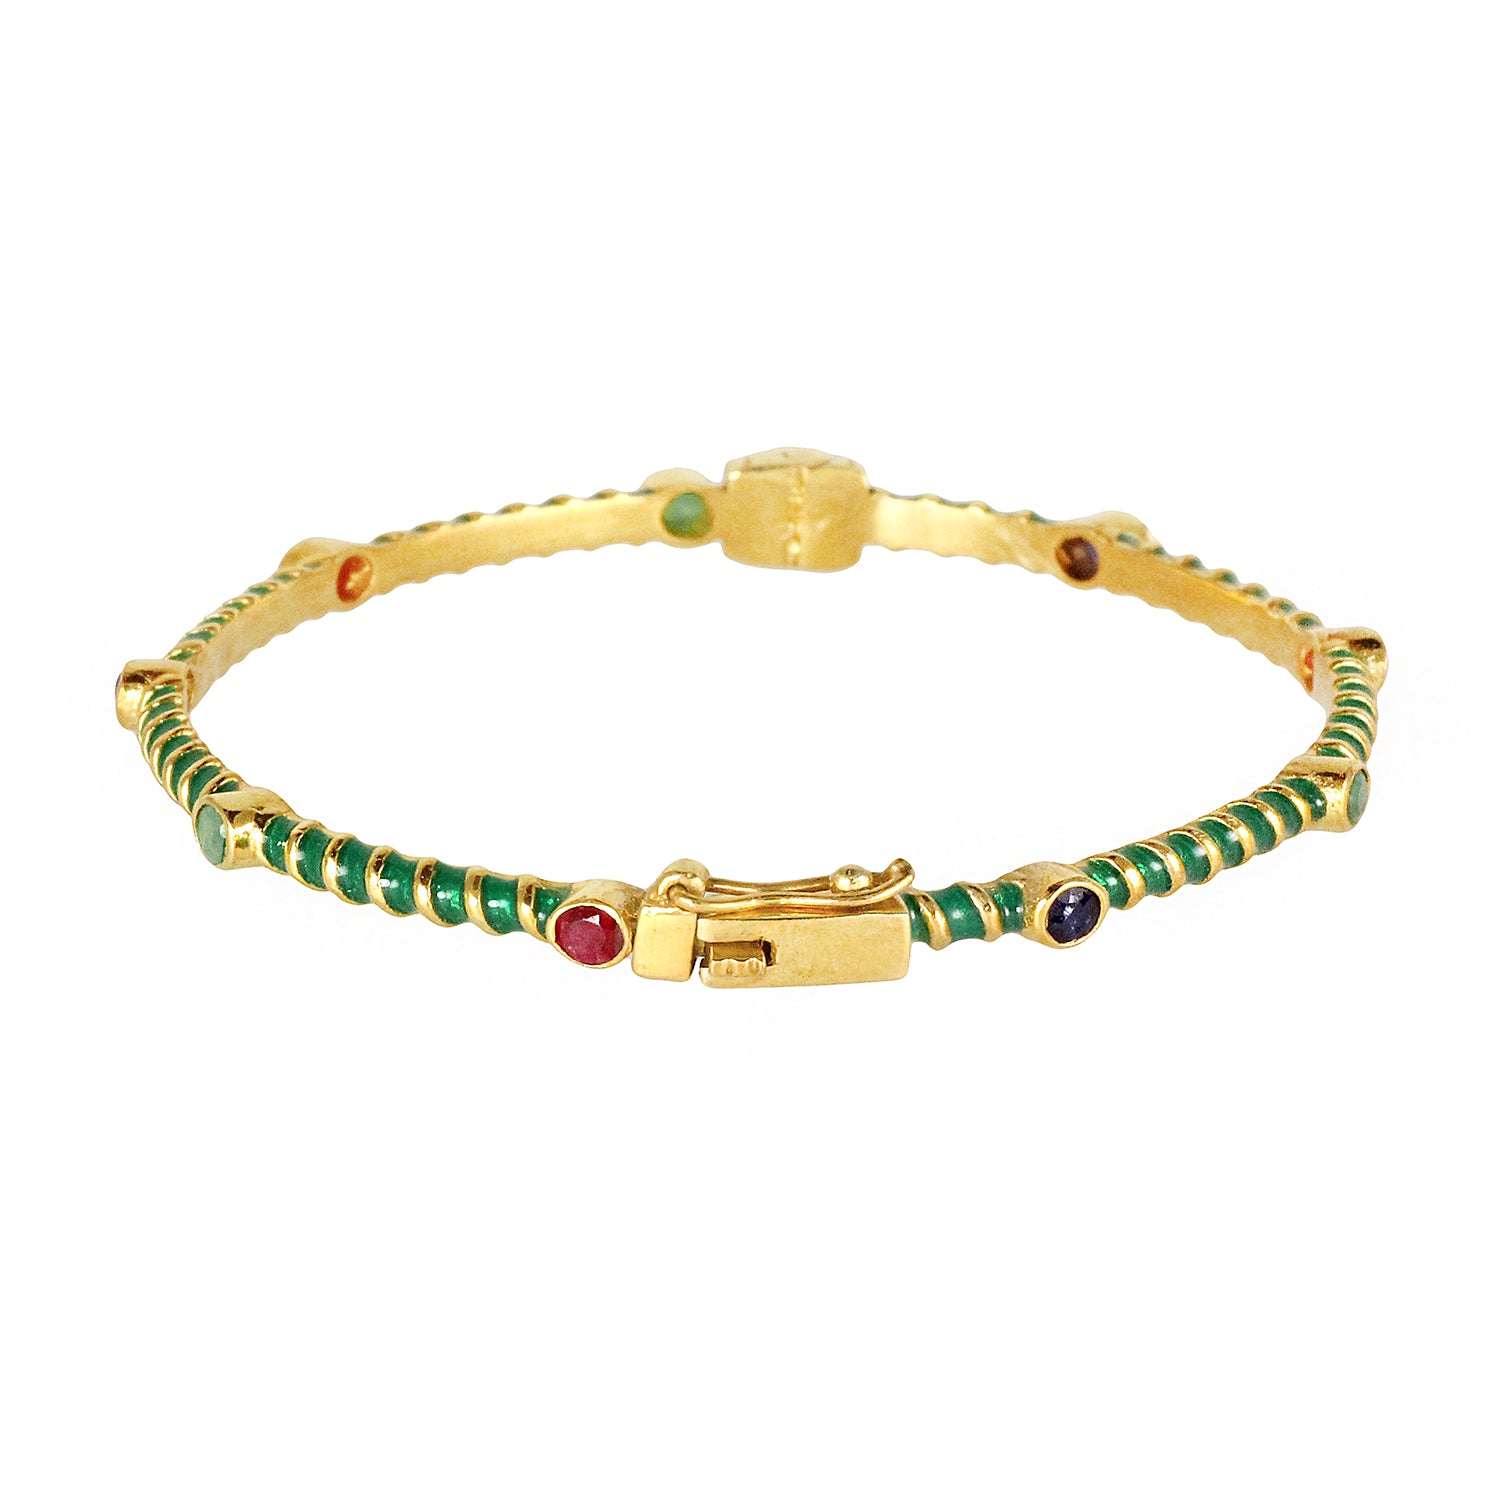 Silver gold plated with green enamel bracelet bangle together with semi precious stones made in India